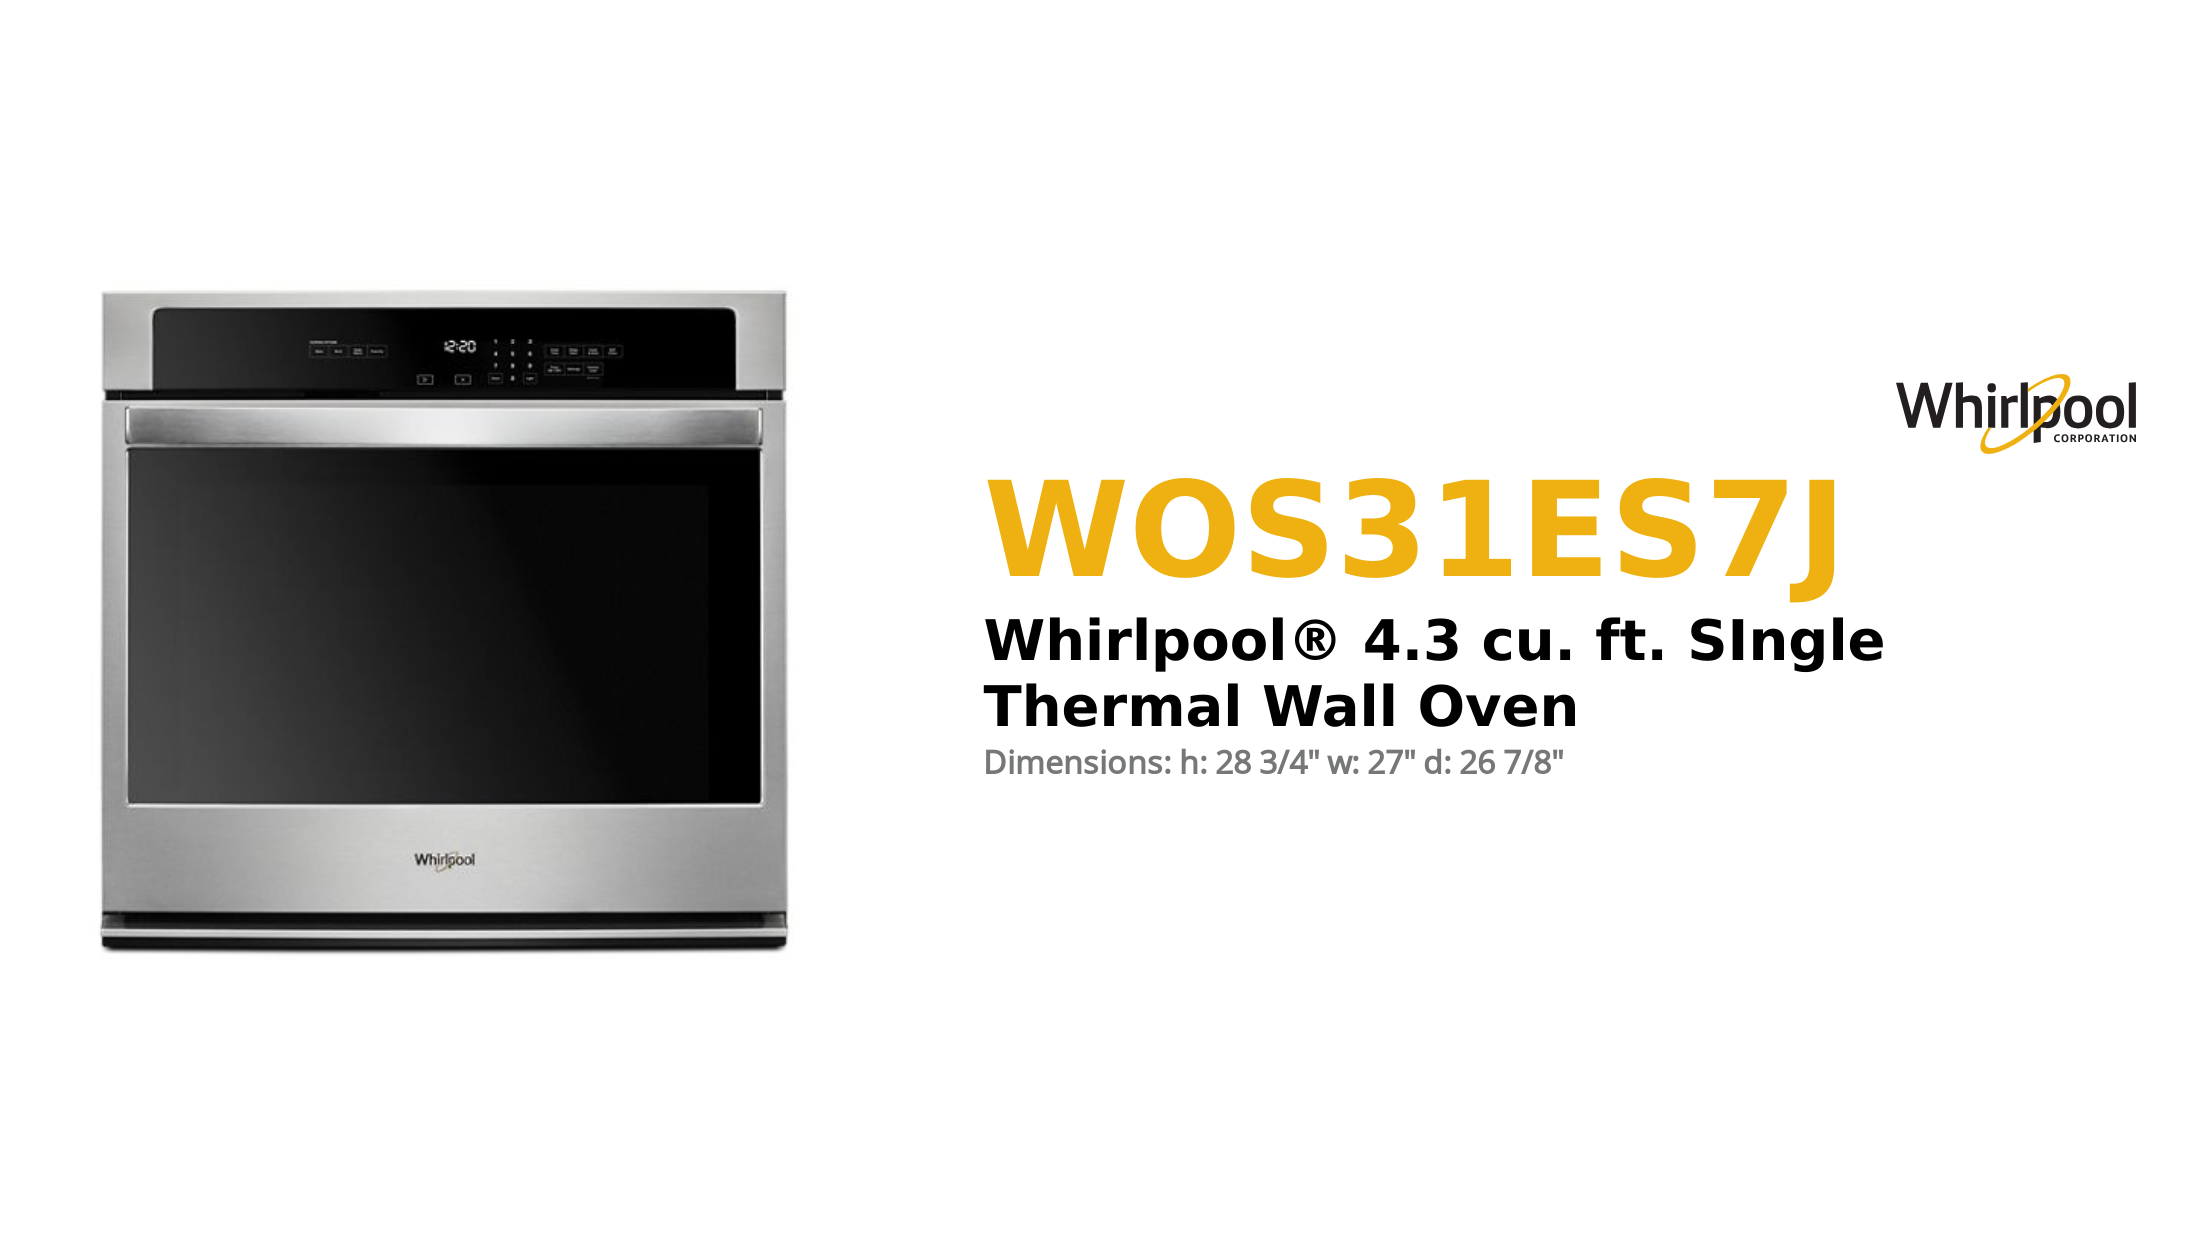 Whirlpool® 4.3 cu. ft. SIngle Thermal Wall Oven
 